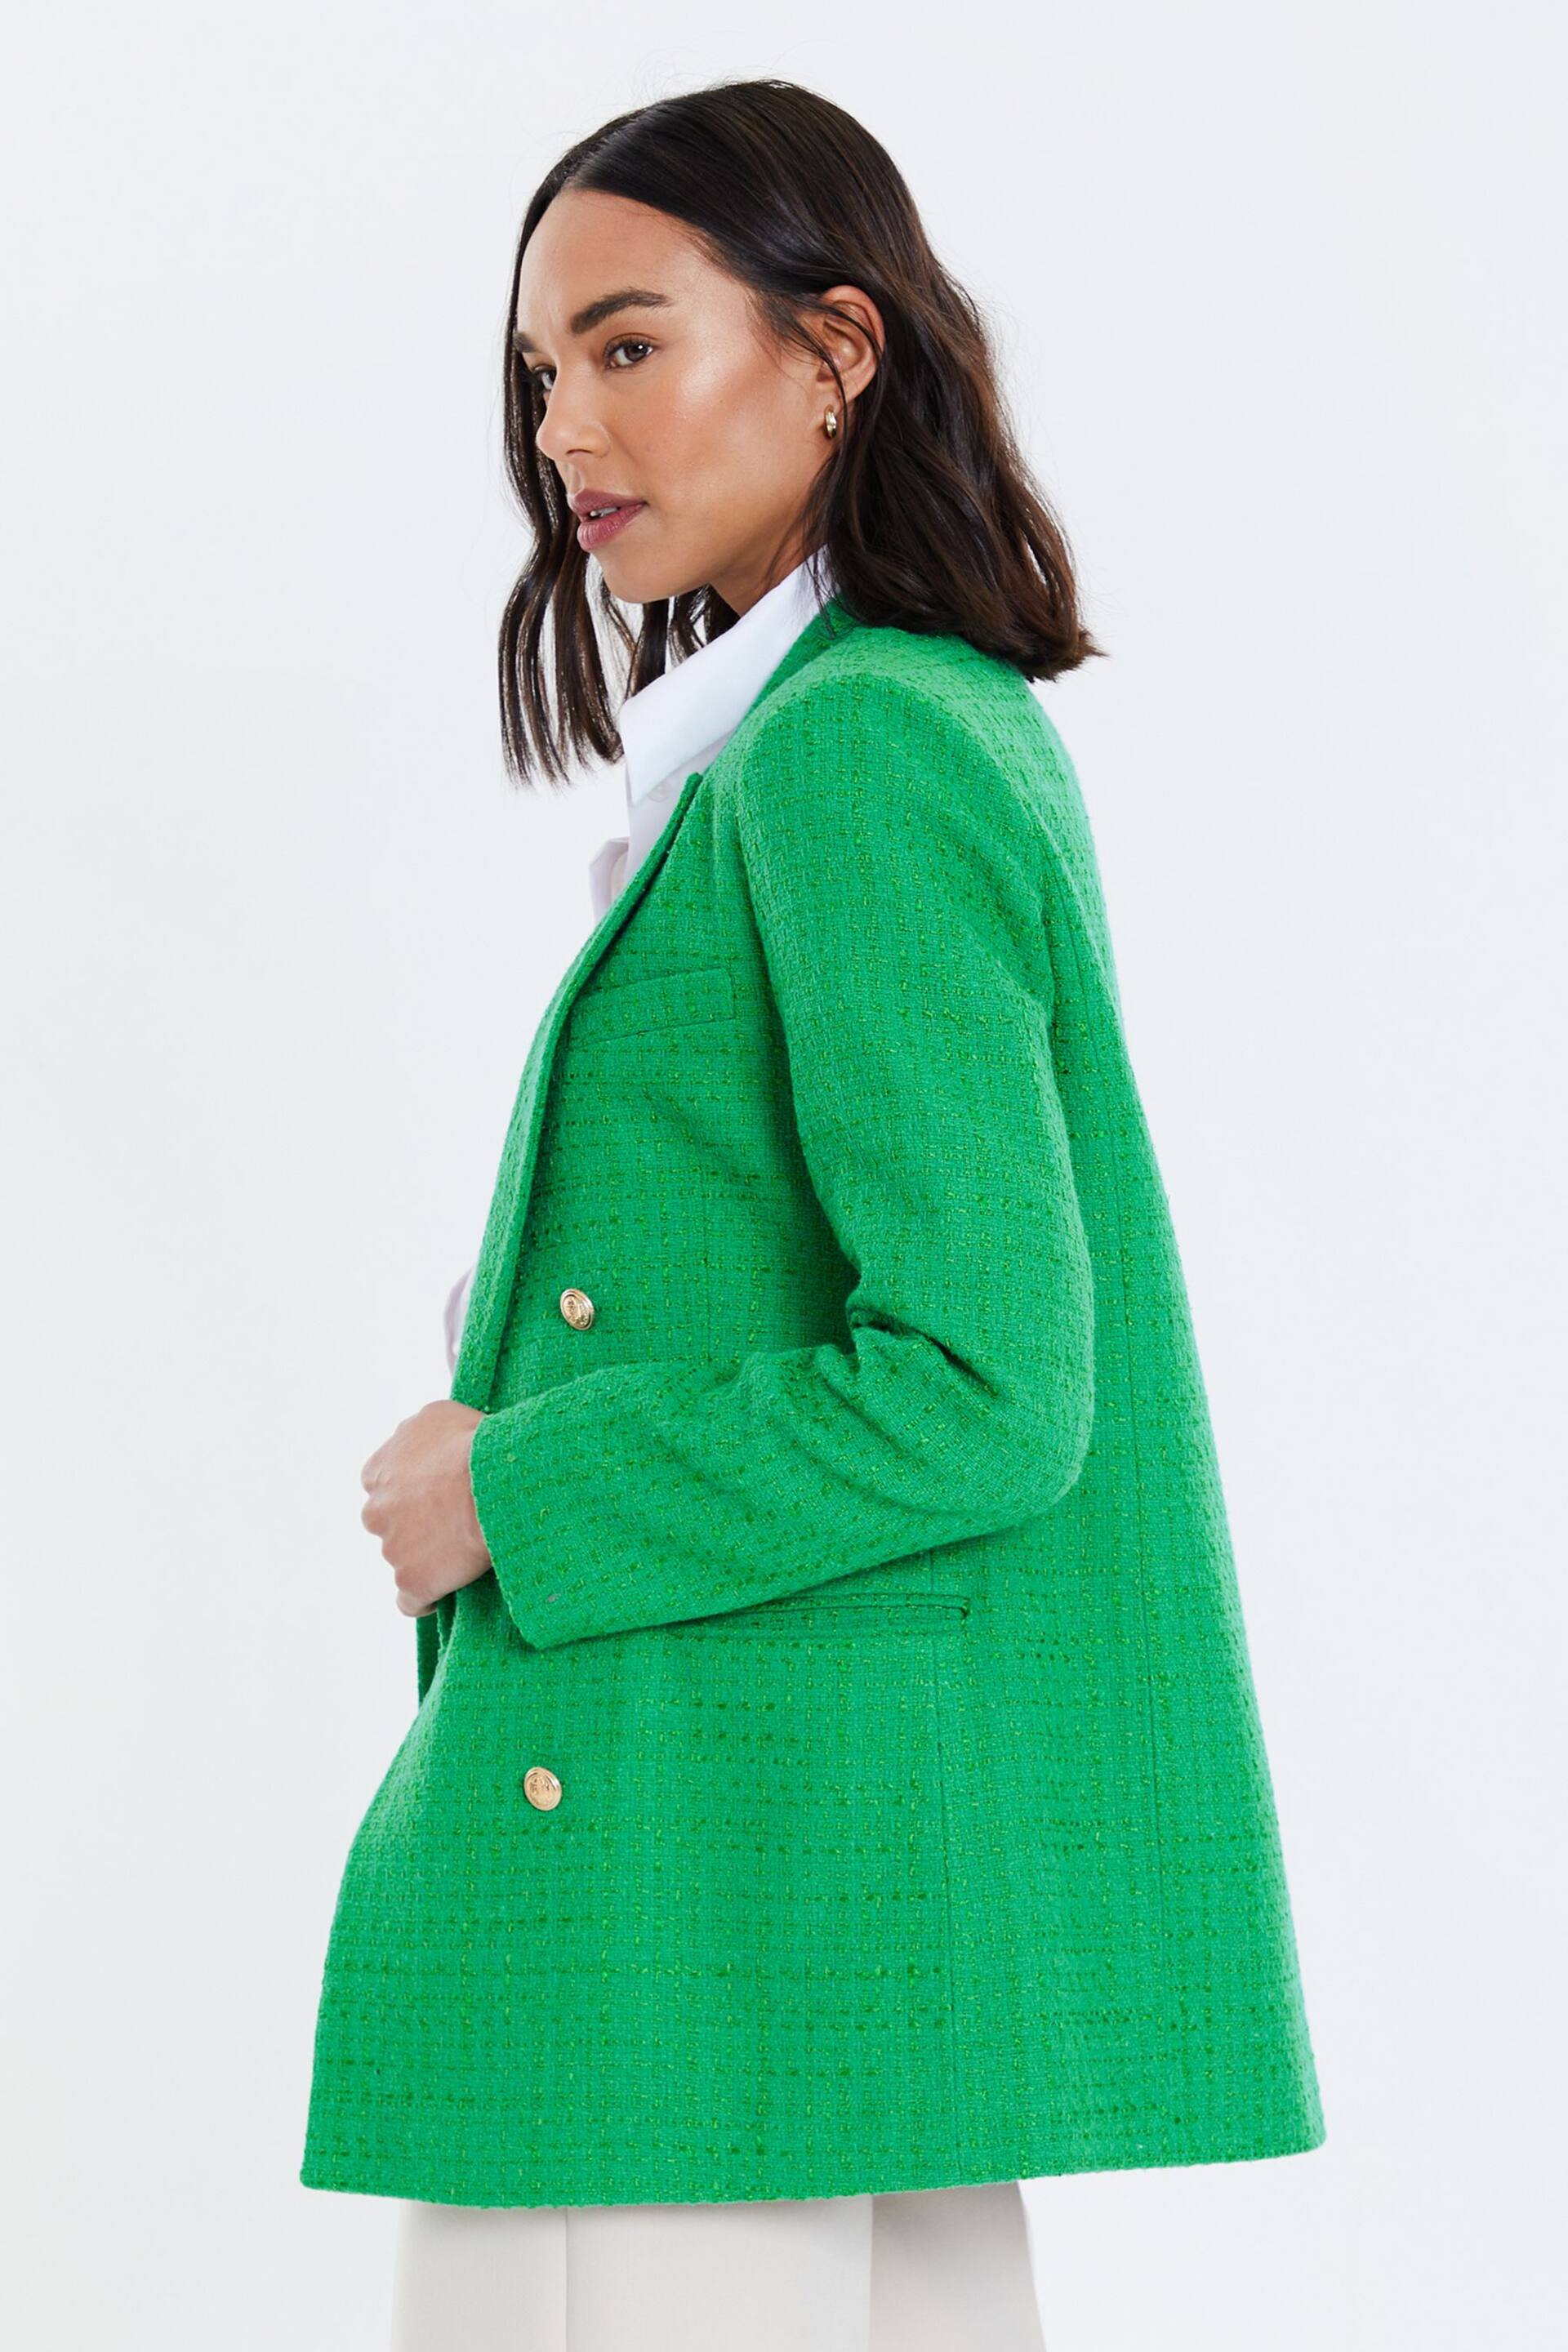 Threadbare Green Double Breasted Boucle Blazer - Image 3 of 5